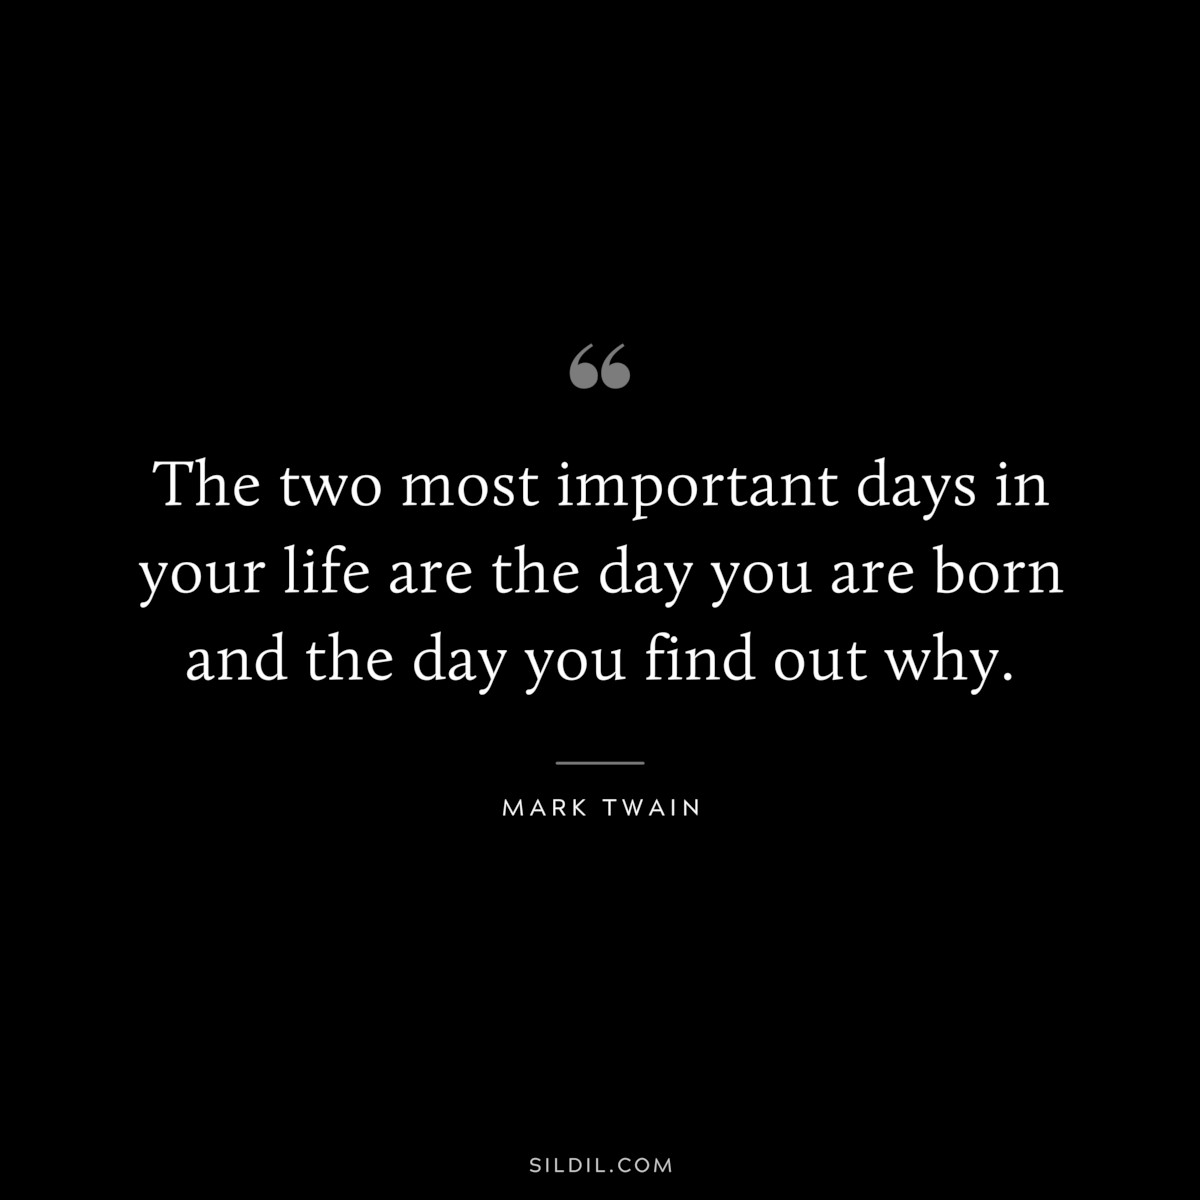 The two most important days in your life are the day you are born and the day you find out why. ― Mark Twain